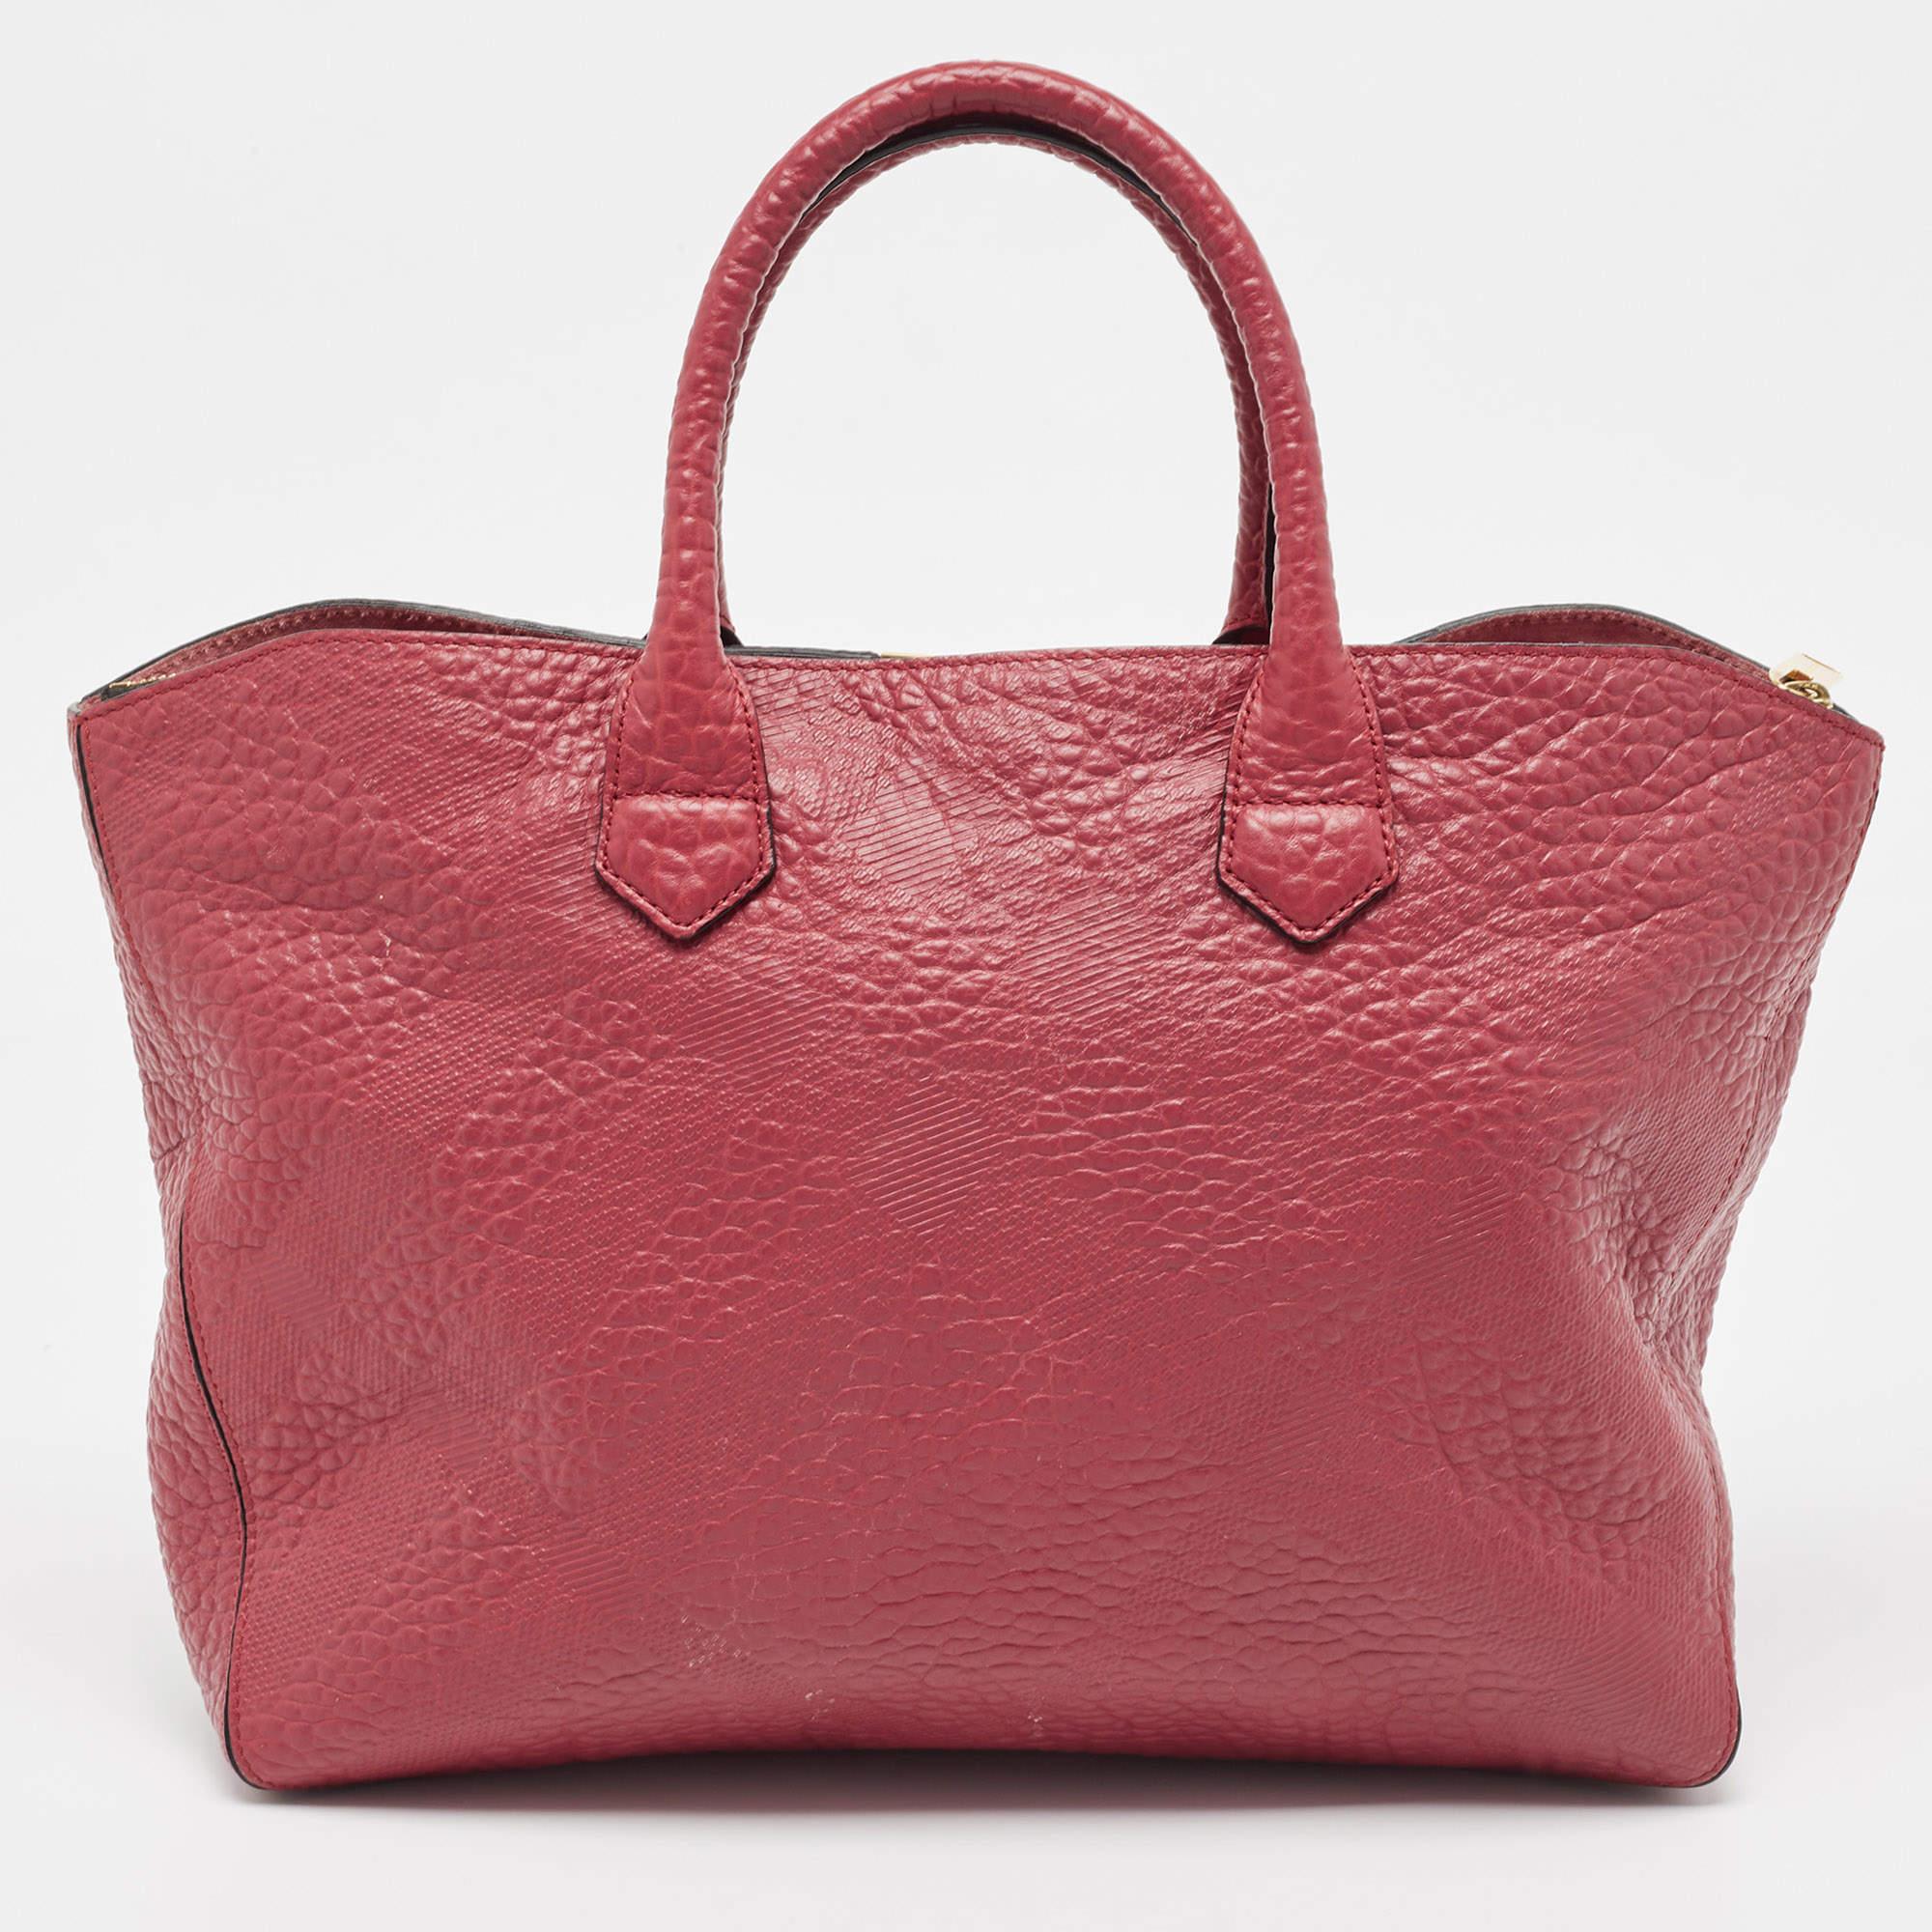 Add an essence of style and chicness to your look, flaunting this opulent Dewsbury tote by Burberry. Crafted from red leather, it features dual top rolled handles along with the shoulder strap and a brand logo at the front. The zip enclosed